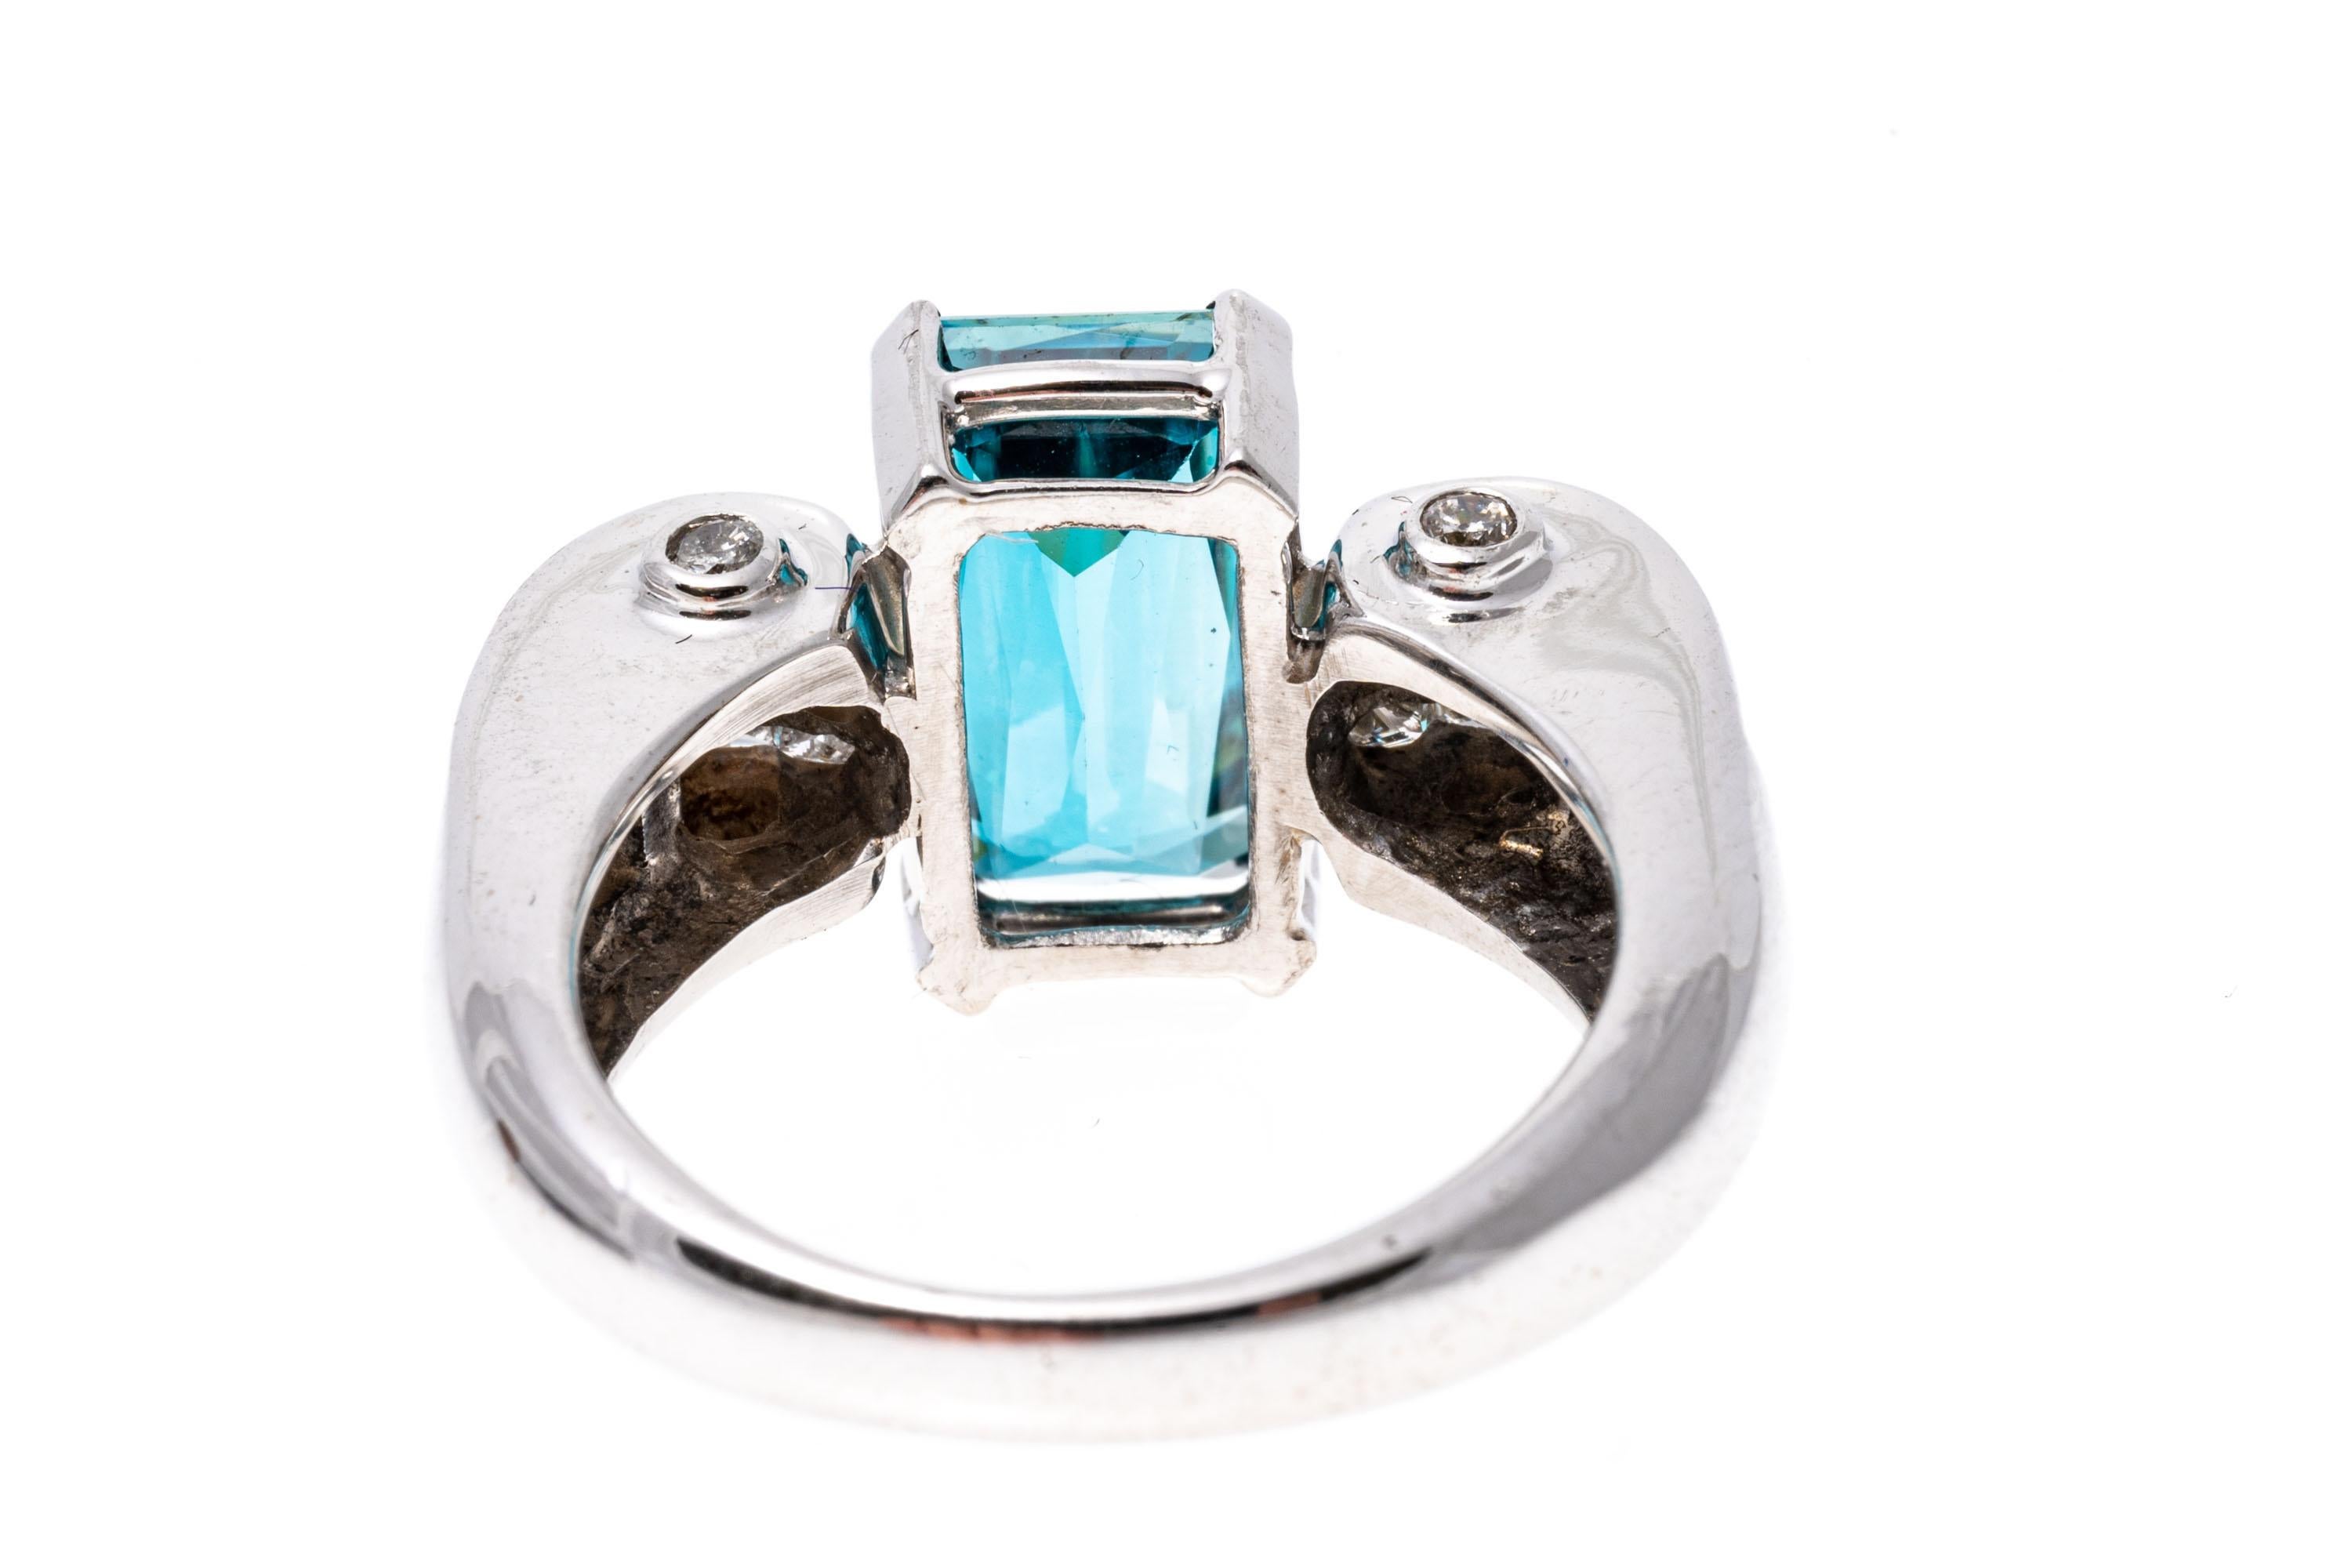 Women's 14k White Gold Scrolled Calibre Princess Cut Diamond And Blue Topaz Ring For Sale